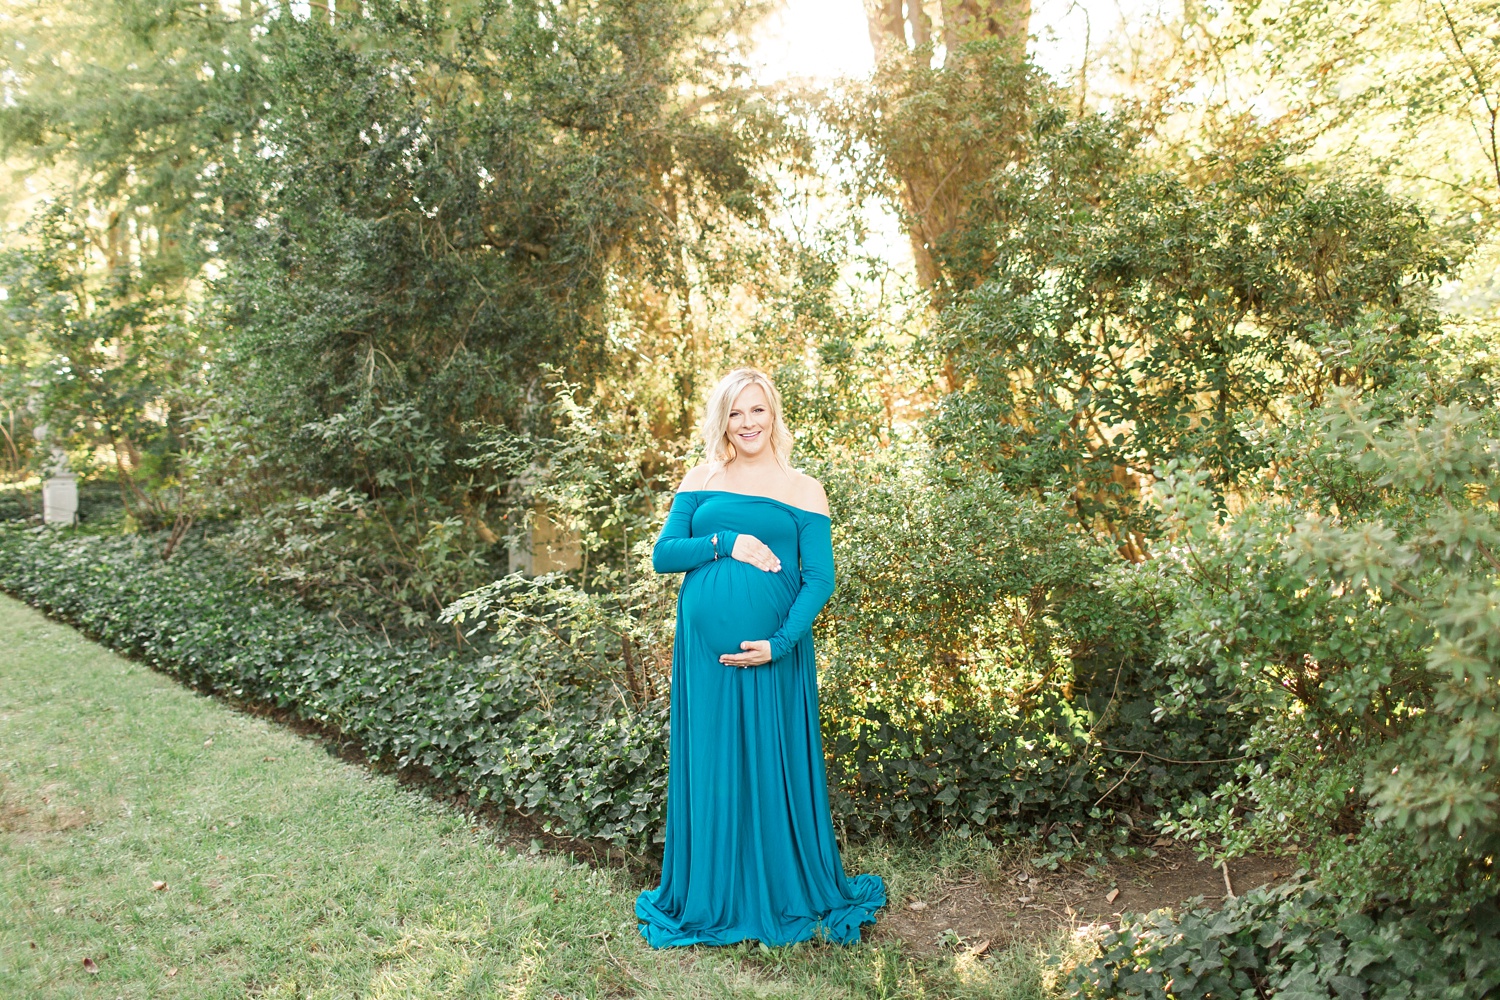 Wilmington DE Maternity Photography | M arian Coffin Gardens at Gibraltar Maternity Session | Ariel